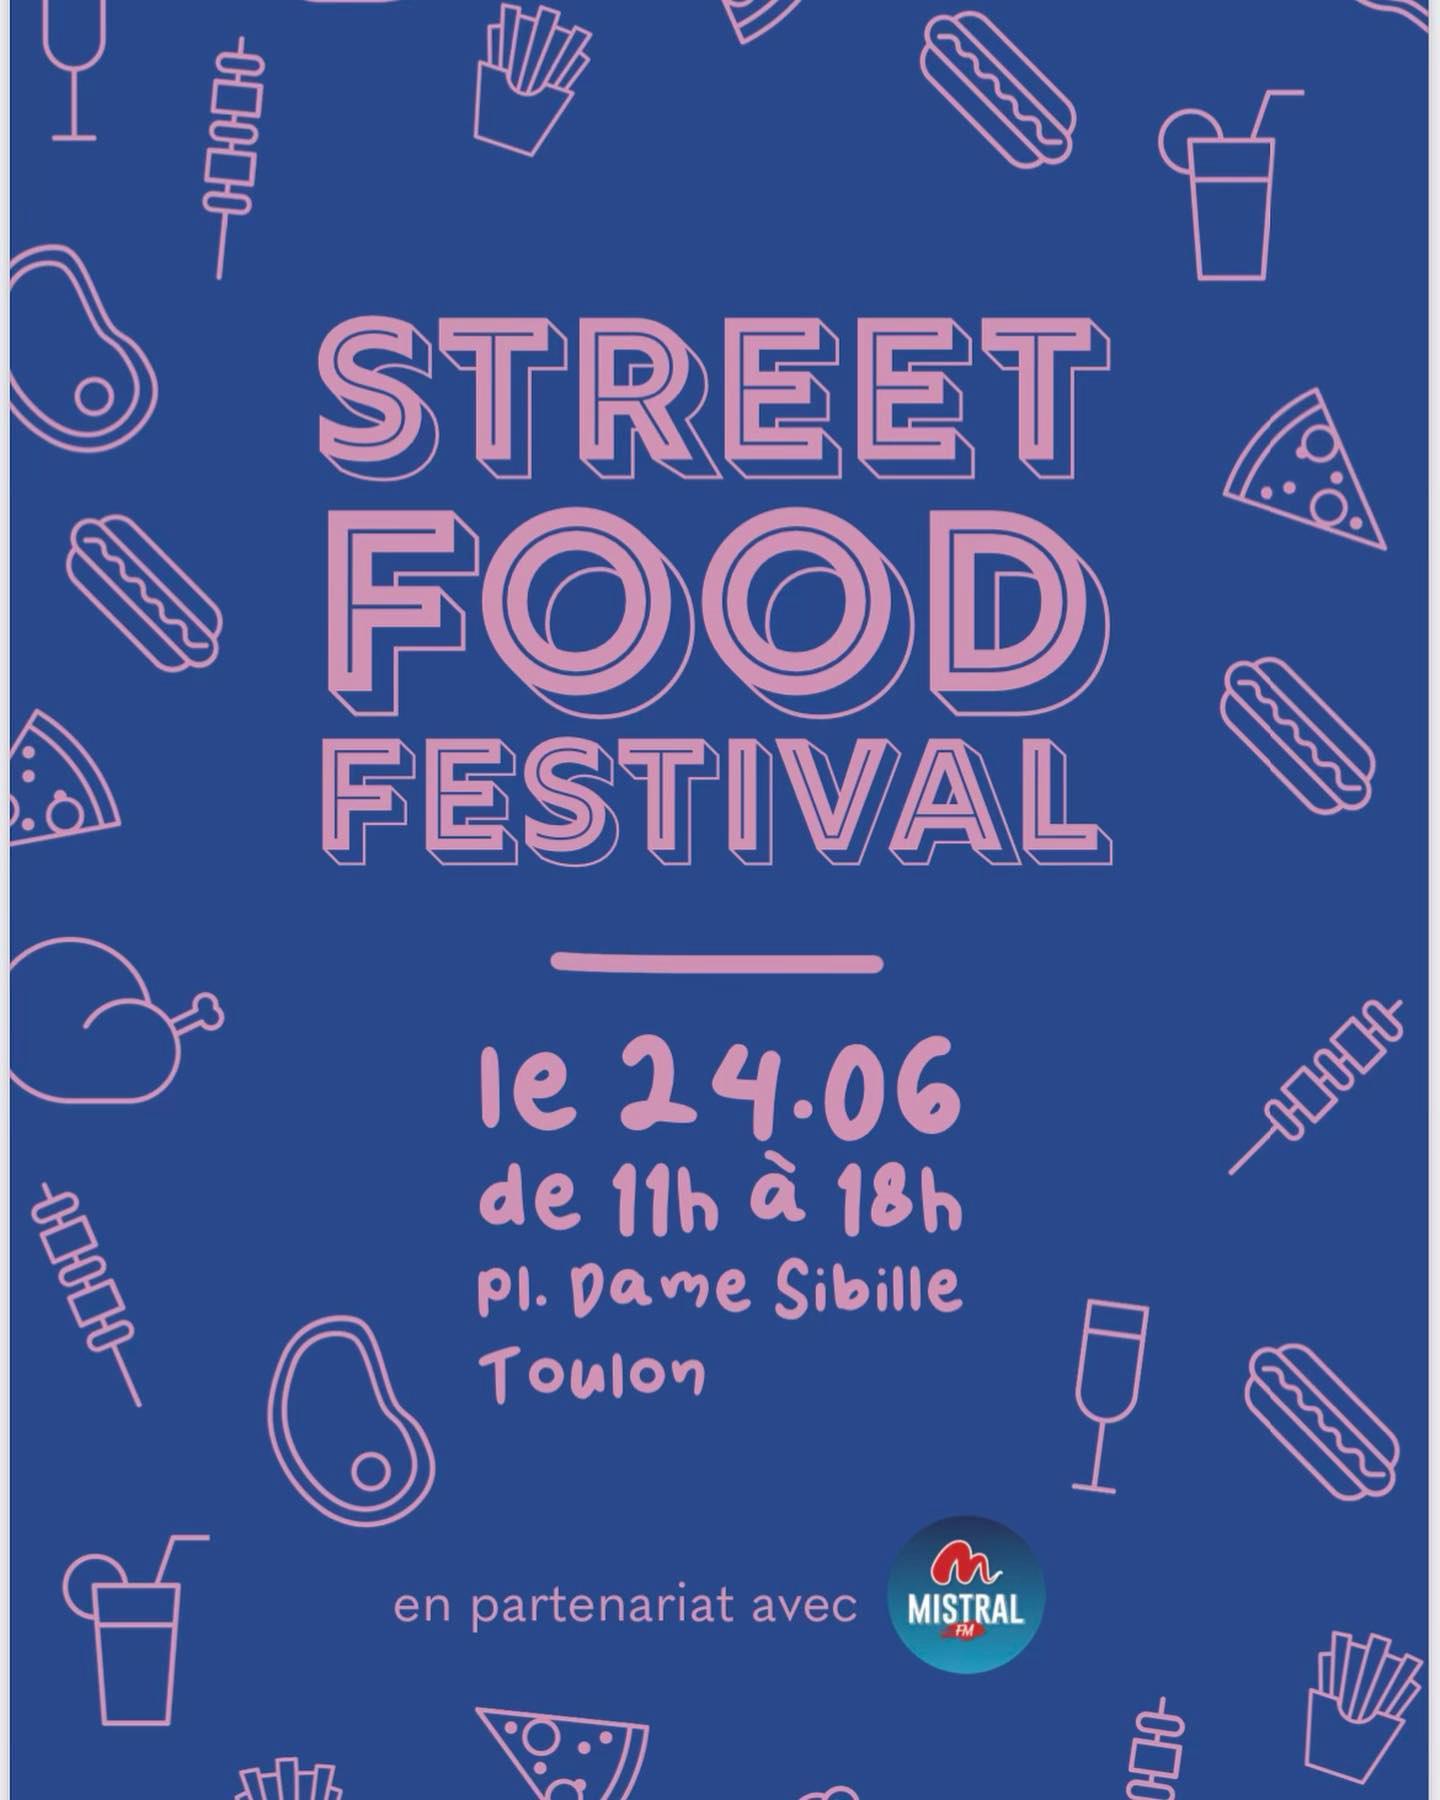 Street Food Party